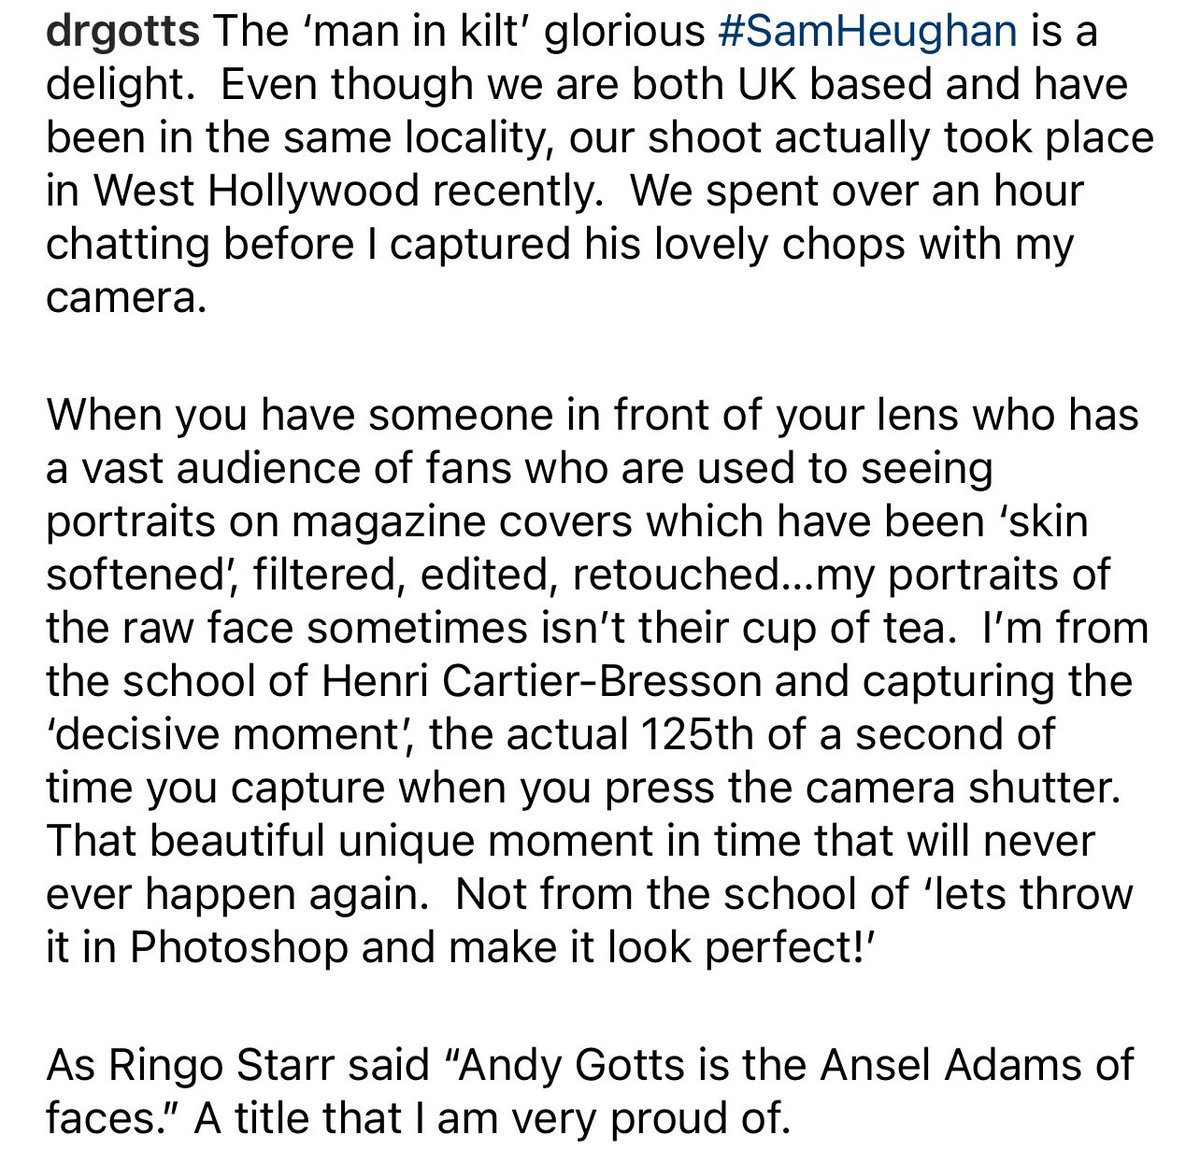 … “that beautiful unique moment in time that will never ever happen again. Not from the school of ‘let’s throw it in photoshop and make it look perfect” - drgotts

#SamHeughan